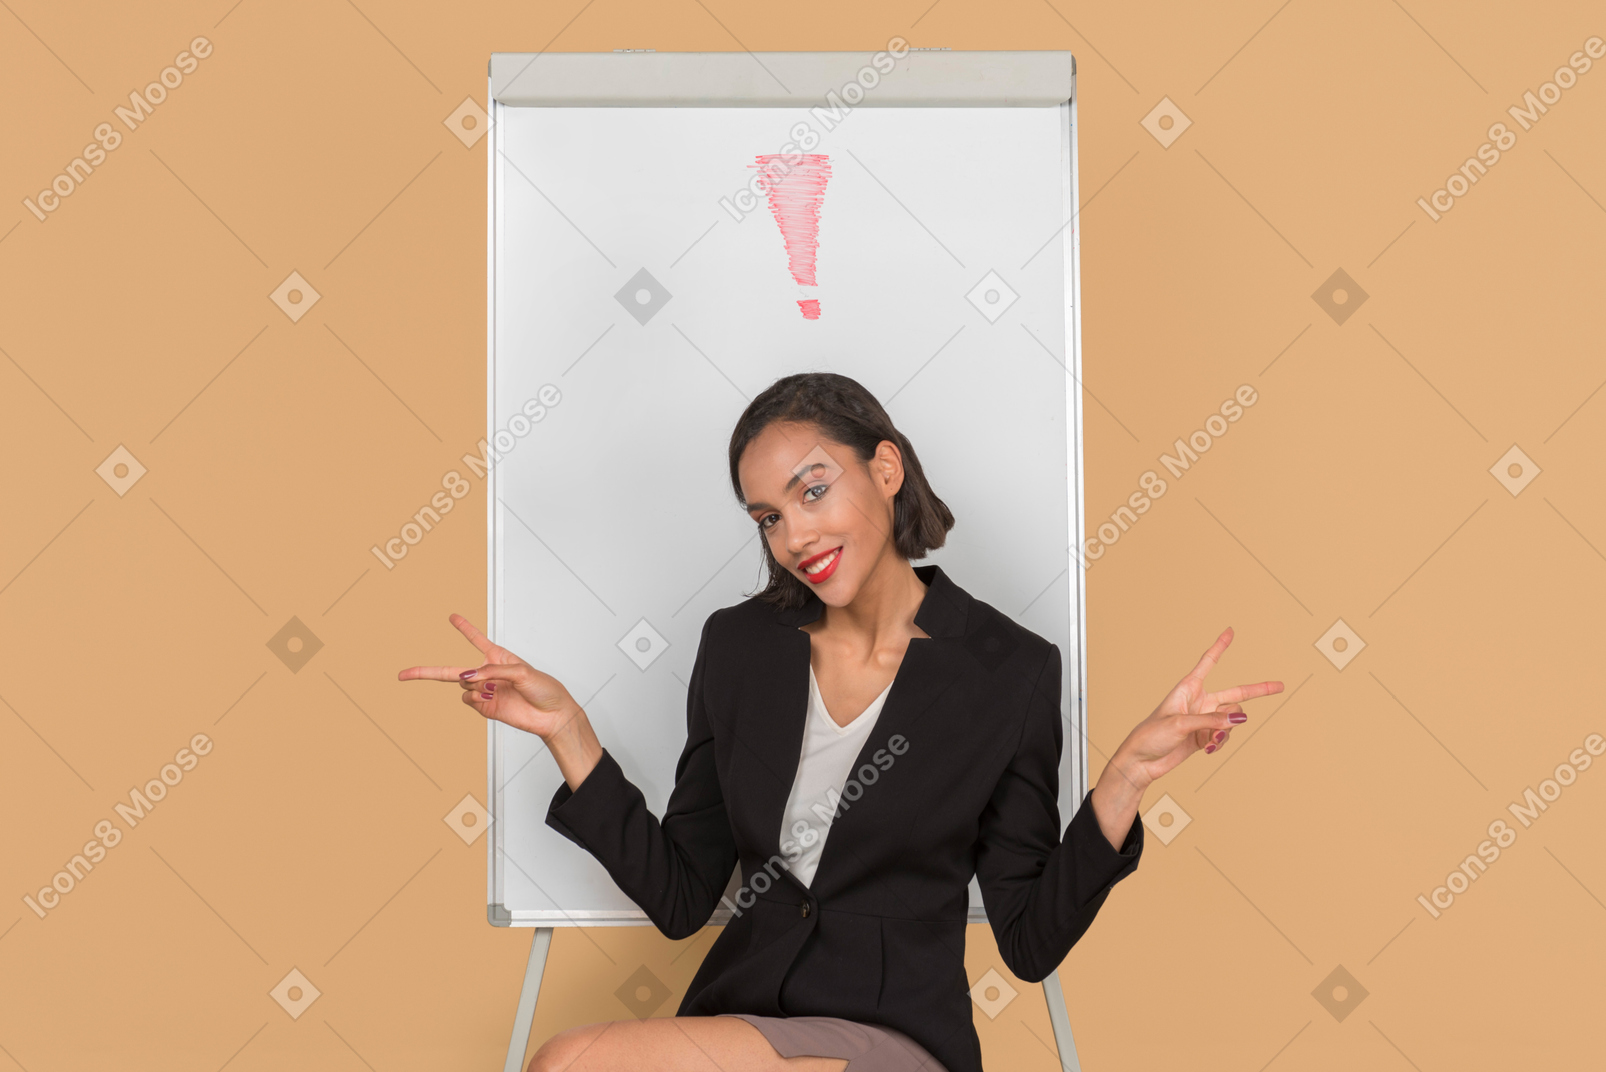 Attractive afro woman sitting by the whiteboard